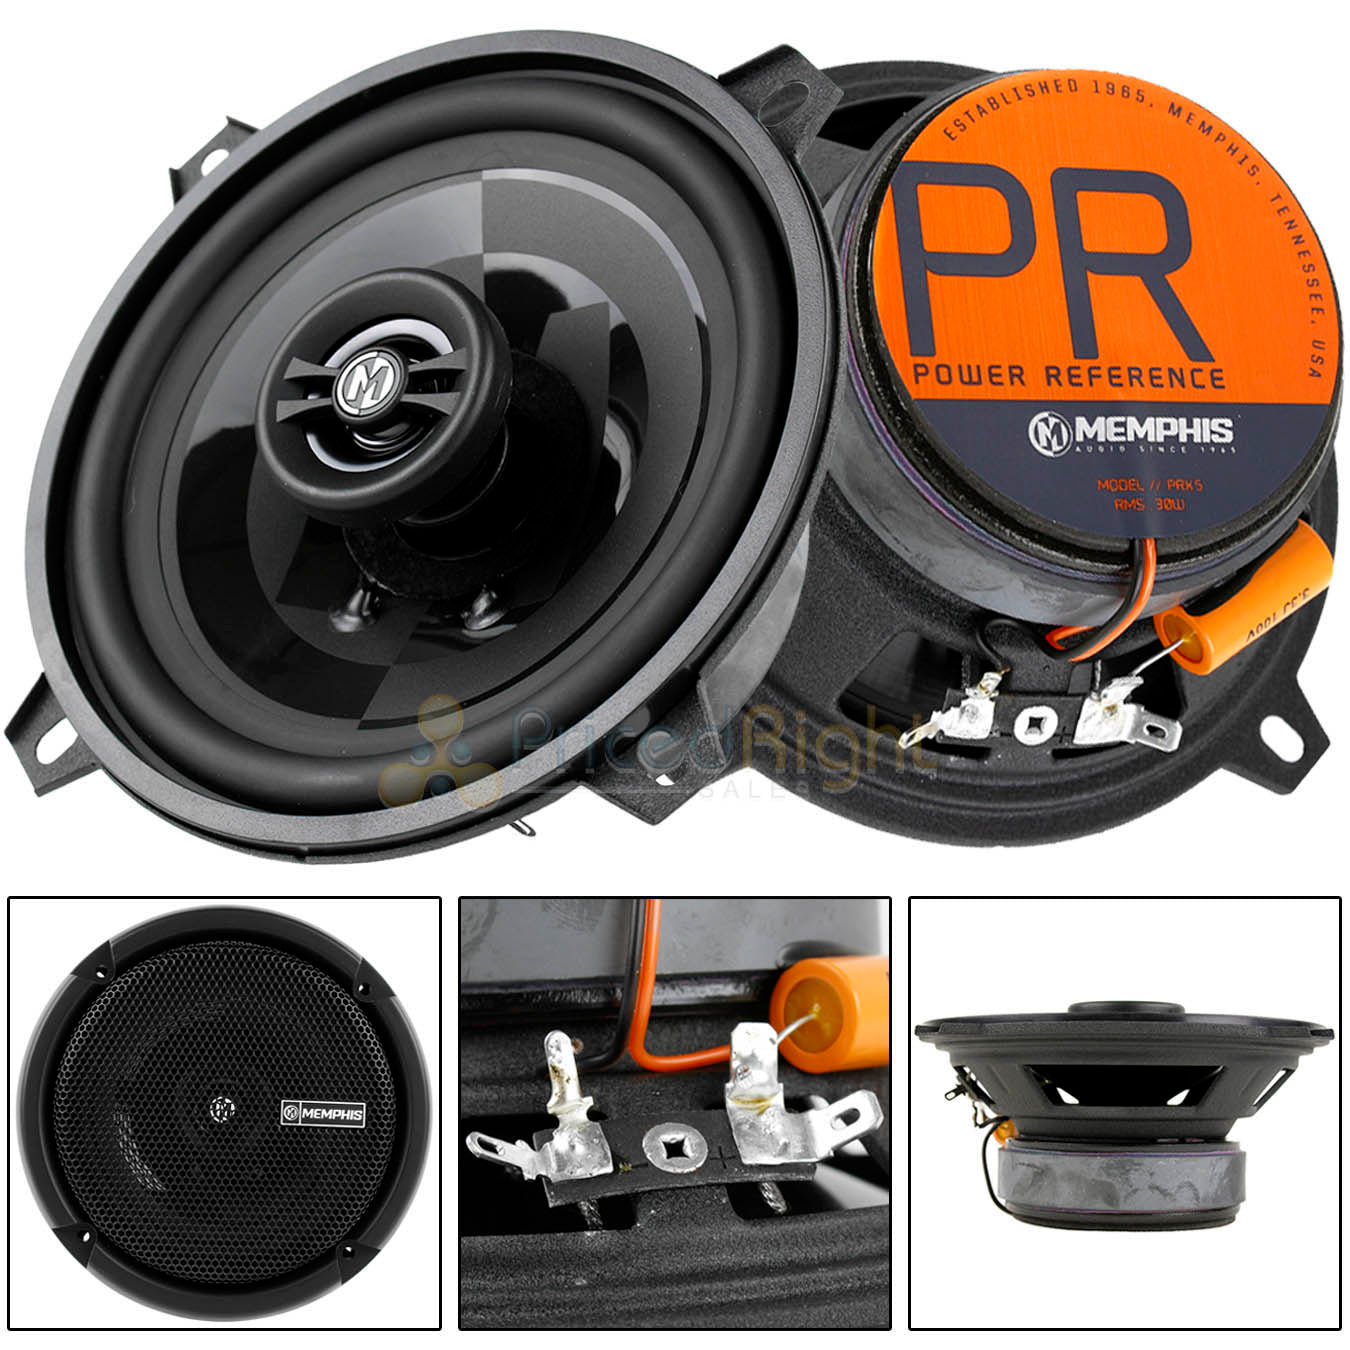 Memphis Audio 5.25" 2 Way Coaxial Speakers 60W Max Power Reference PRX5 Pair